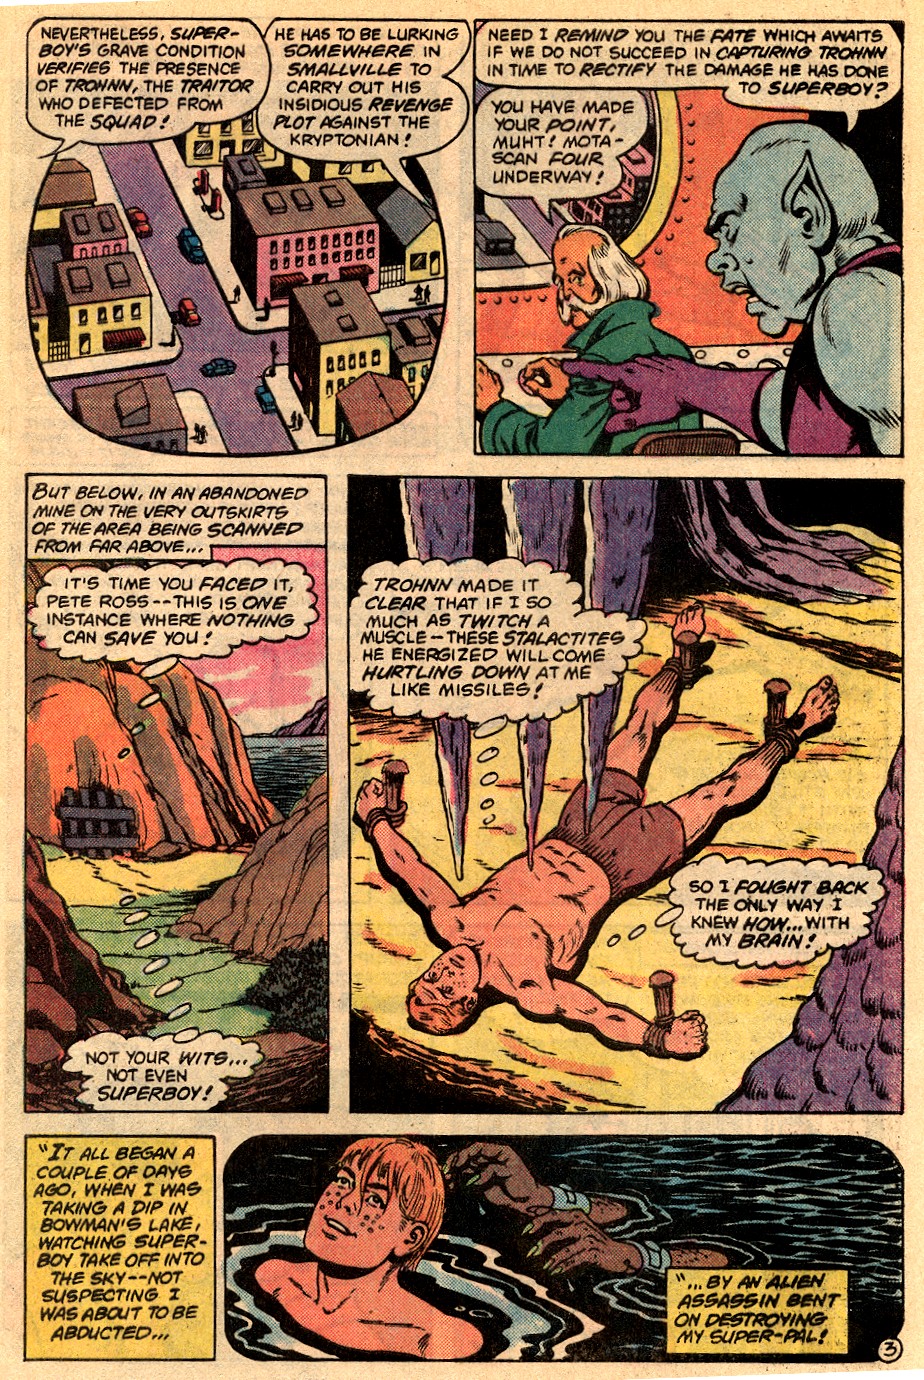 The New Adventures of Superboy 33 Page 4